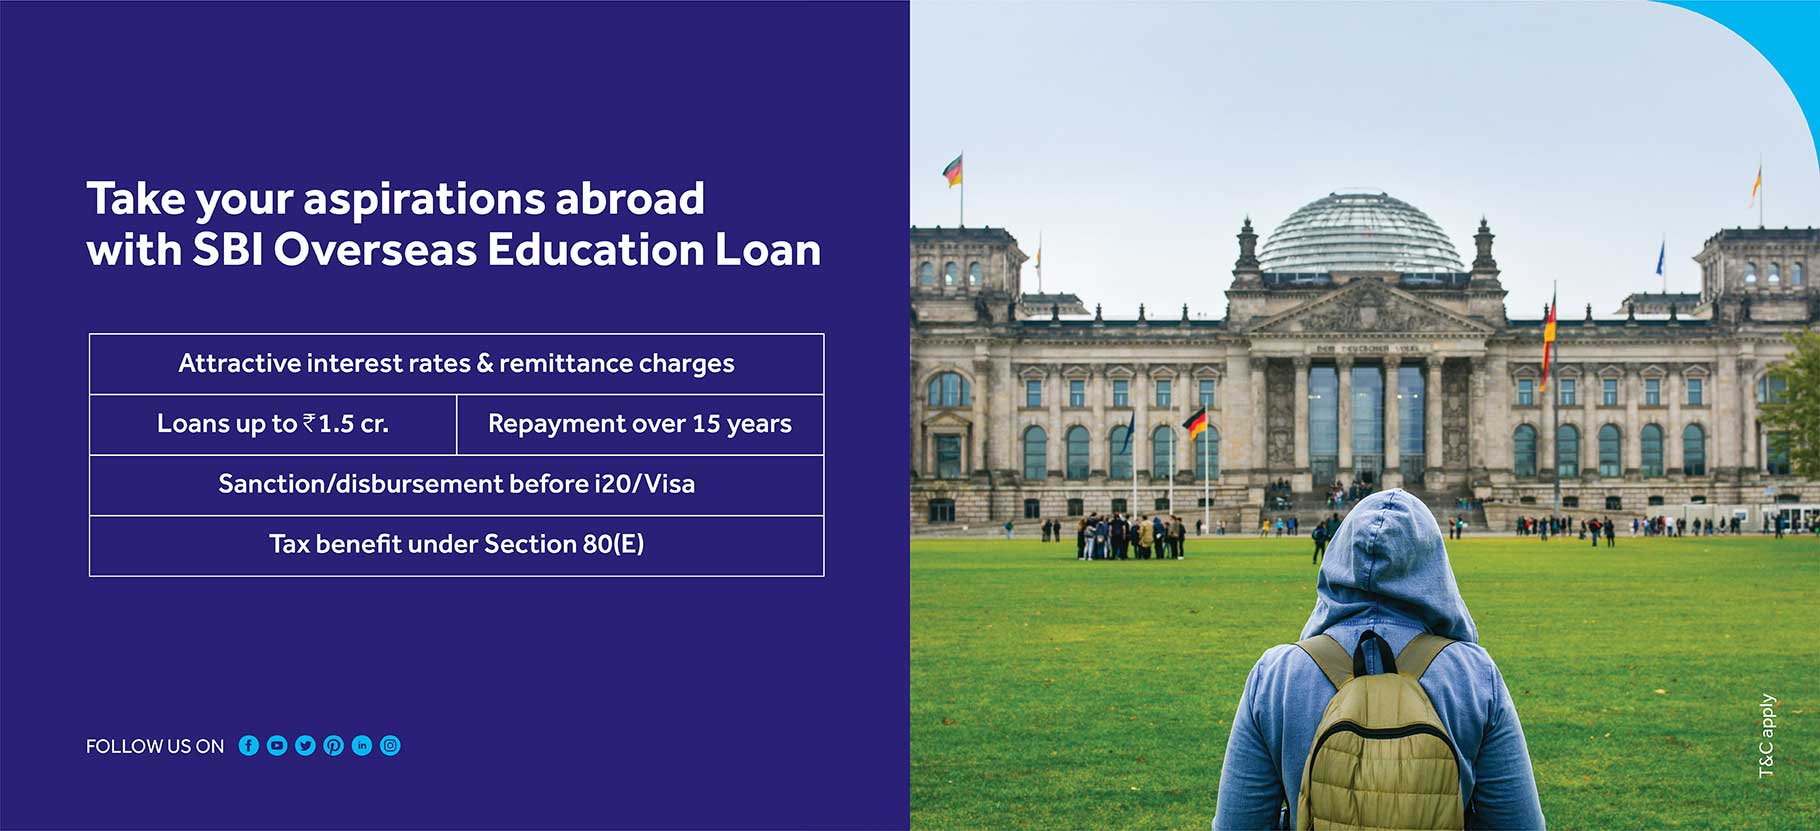 Take your aspirations abrord with sbi overseas education loan